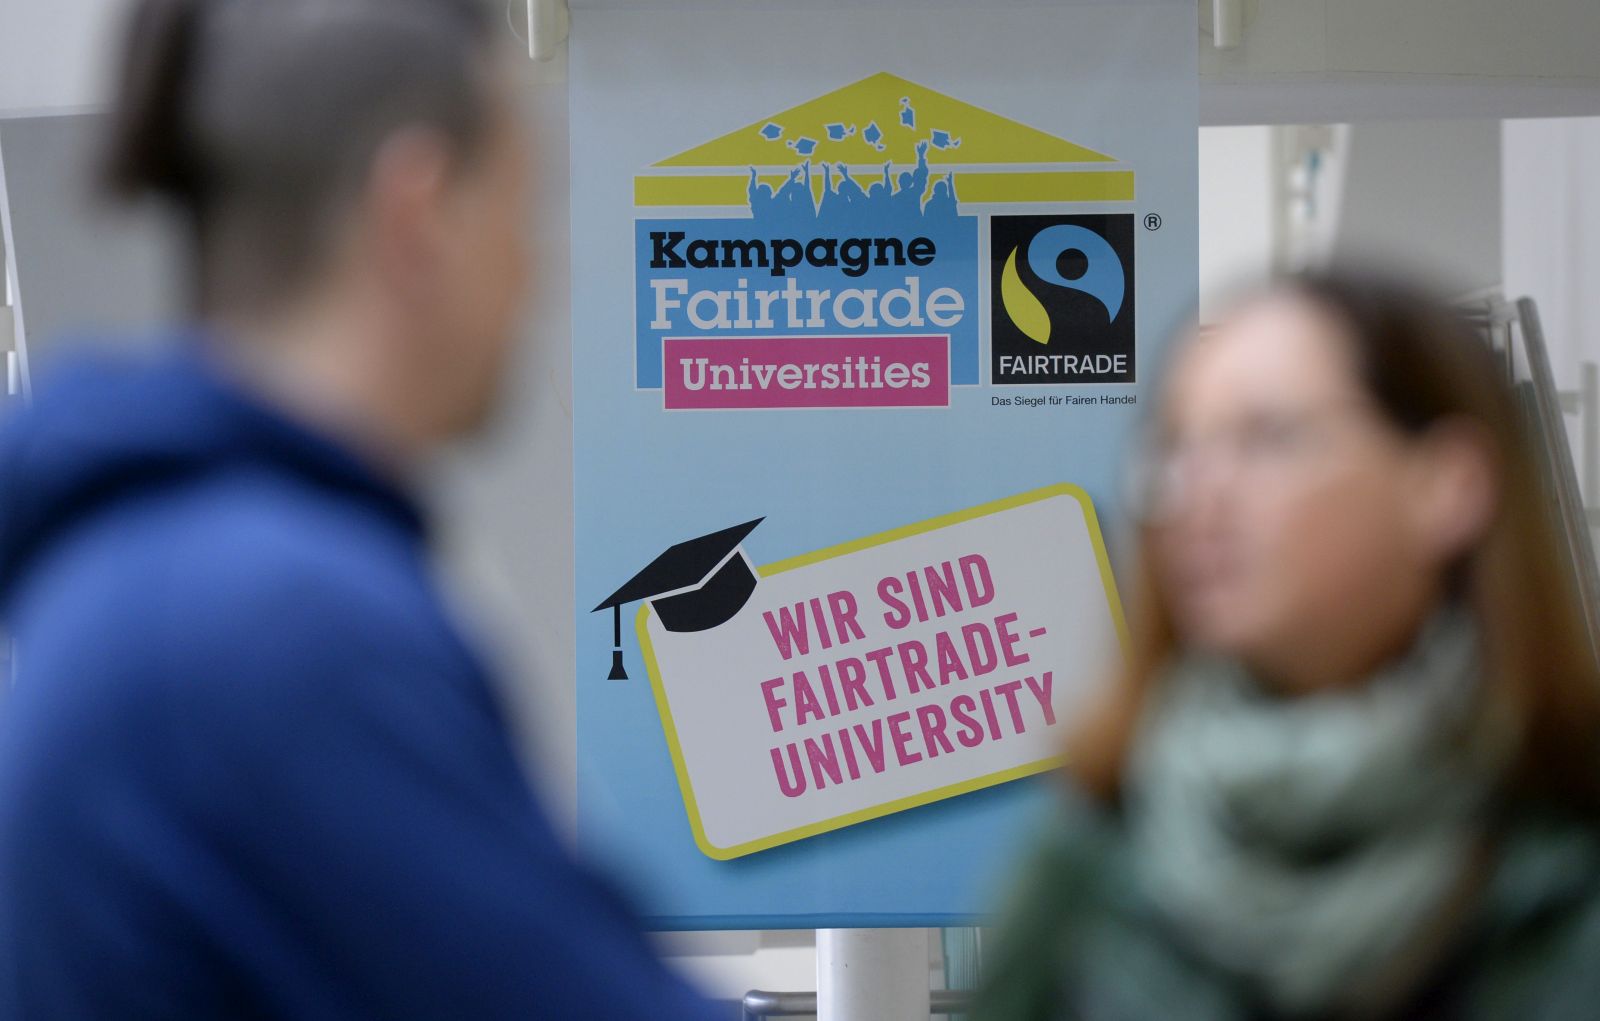 Towards entry "FAU is now “Fairtrade-University”"